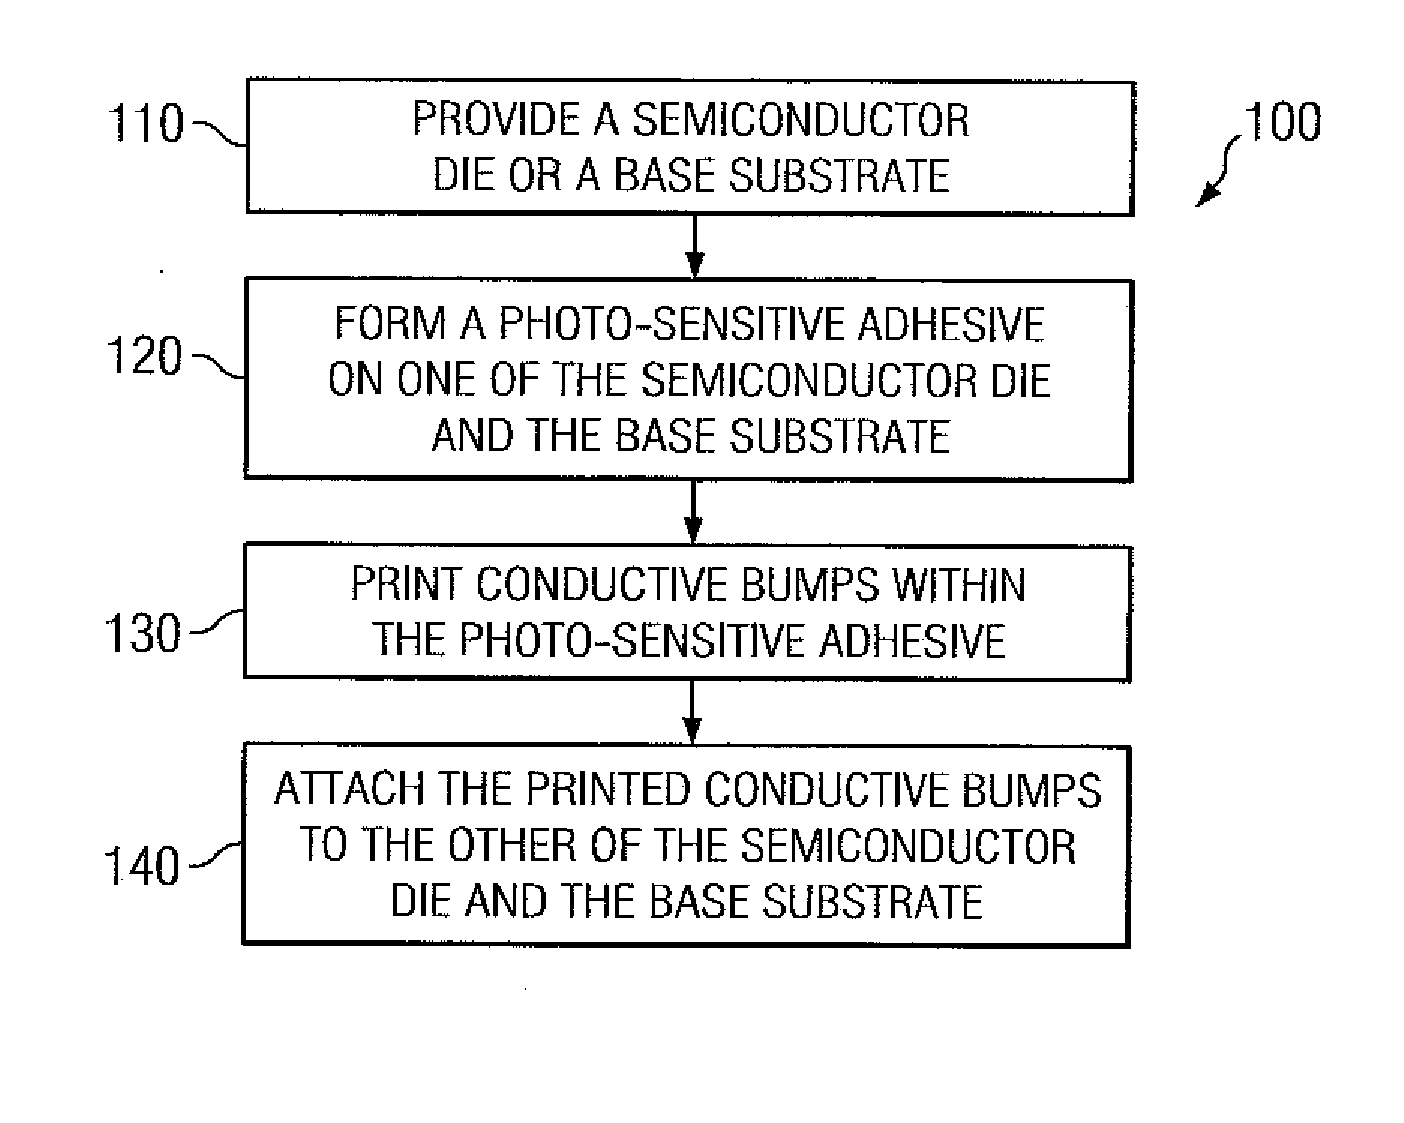 Low-cost flip-chip interconnect with an integrated wafer-applied photo-sensitive adhesive and metal-loaded epoxy paste system